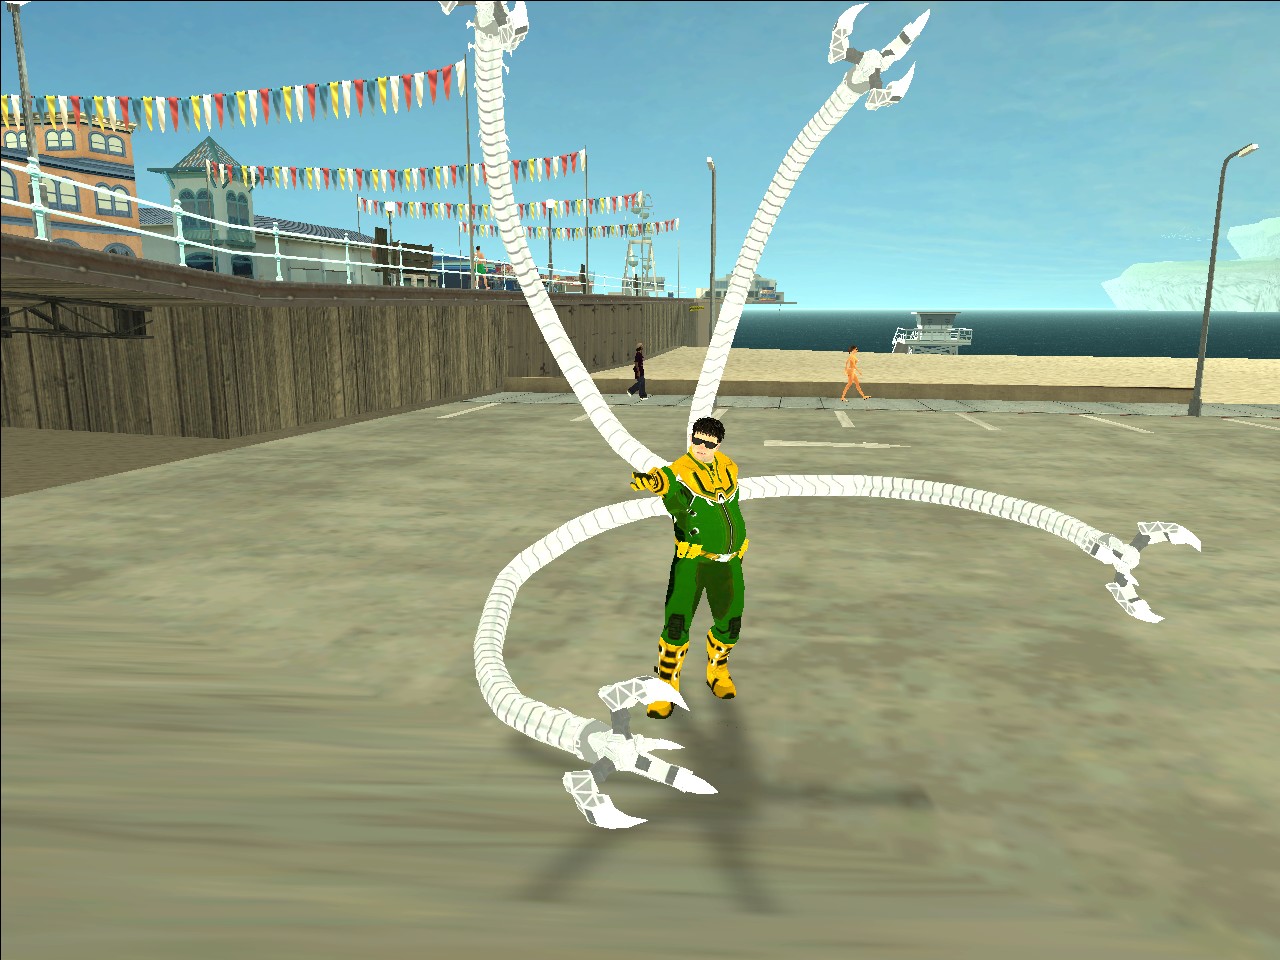 Markmadrox Mods For San Andreas Doctor Octopus